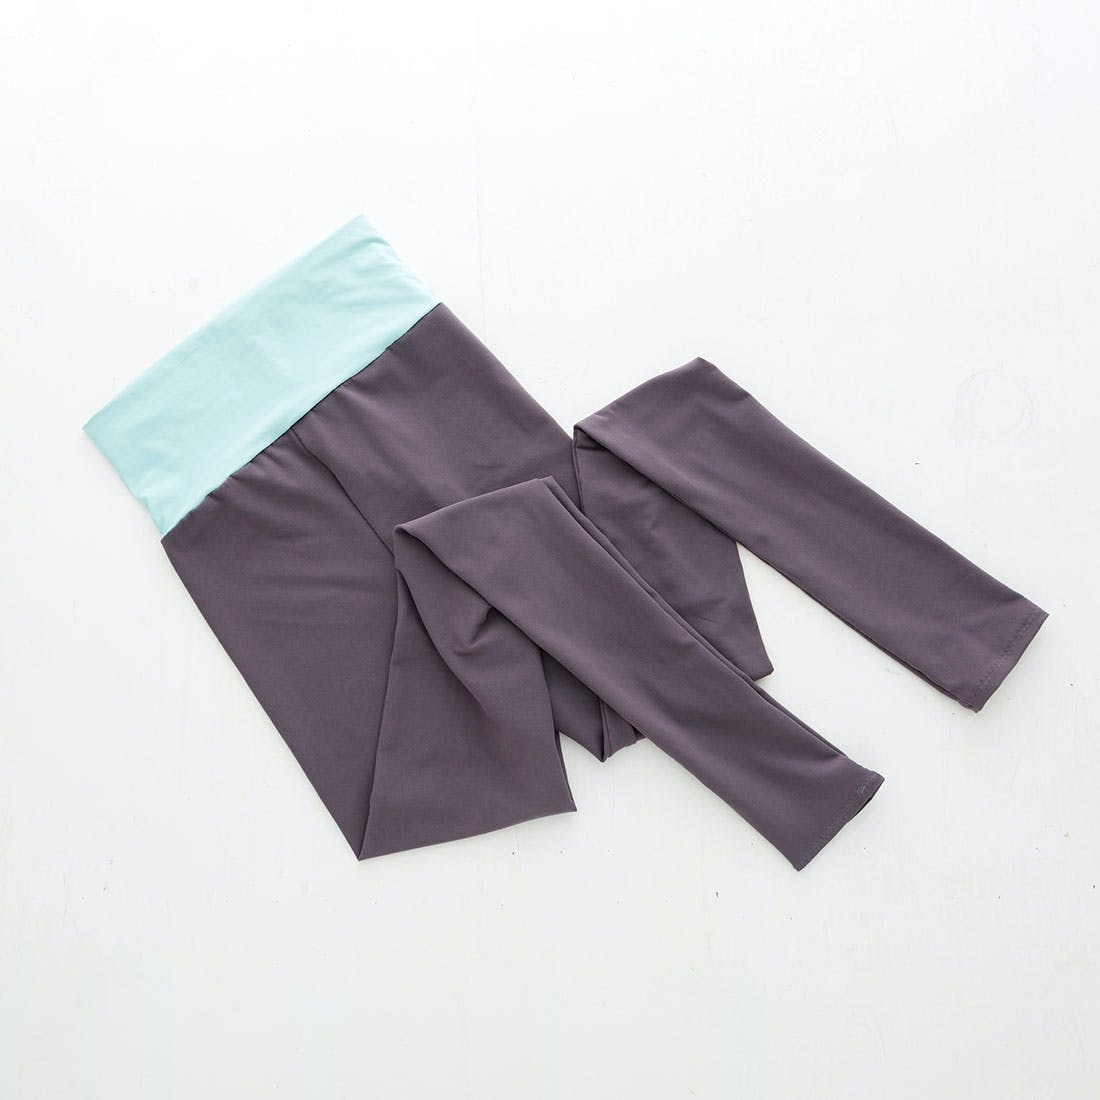 Microfiber Polyester Fabric - Everything You Need To Know - Bryden Apparel